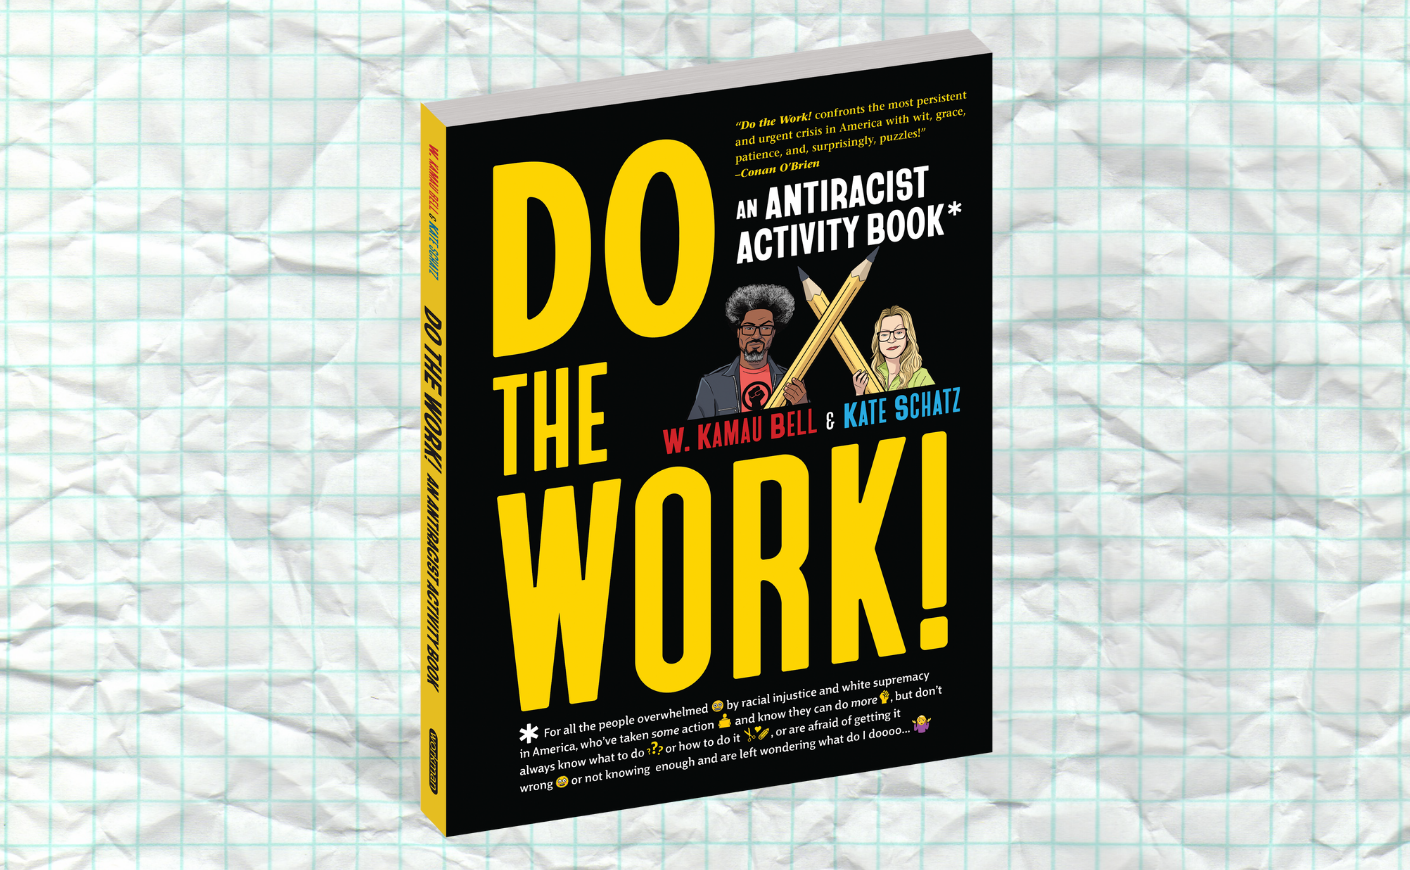 The book cover for "Do the Work!"